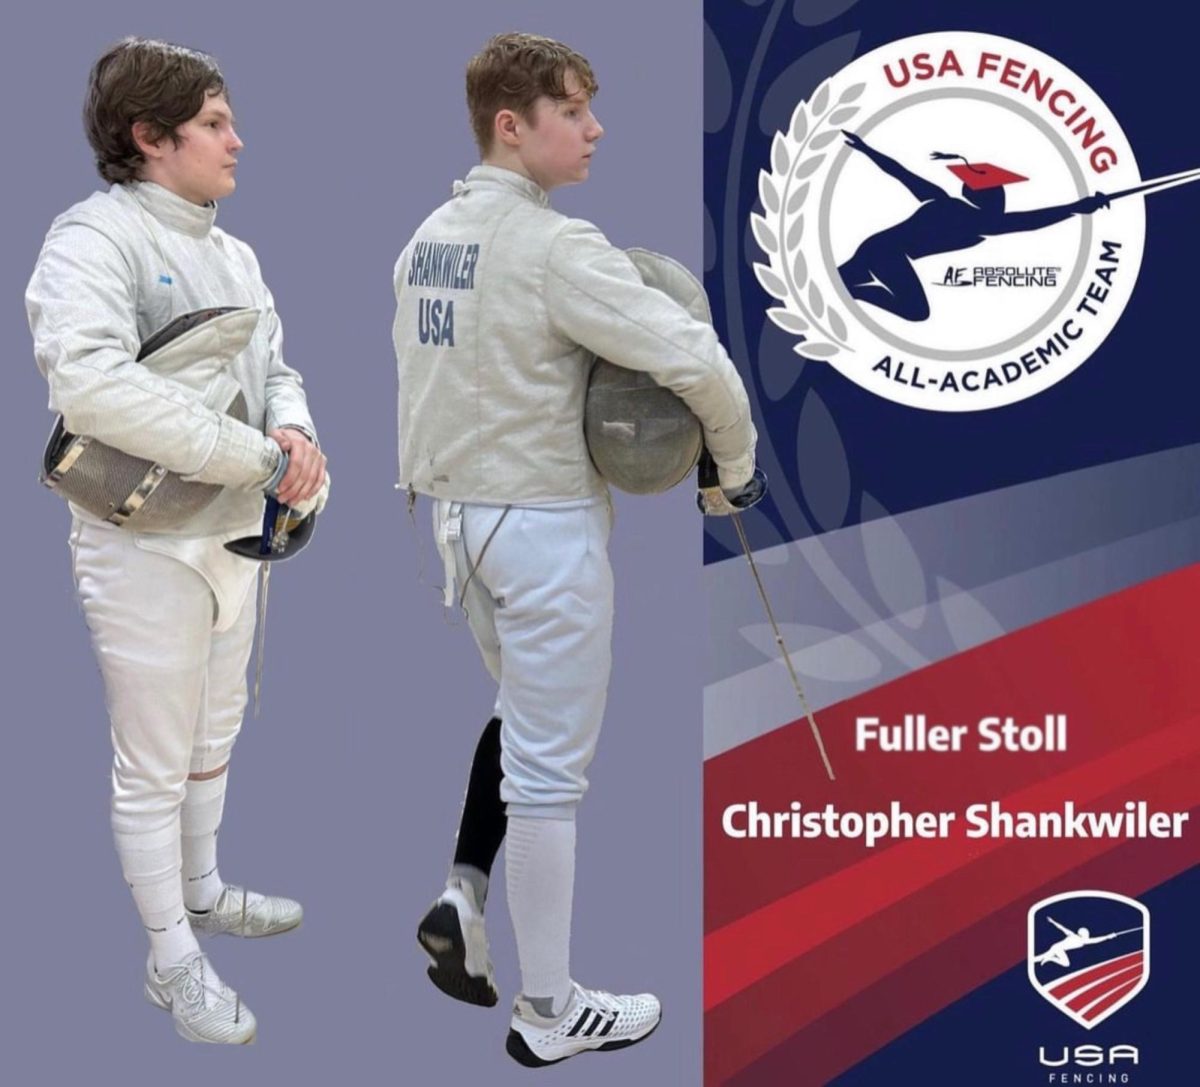 Saber Fencers Fuller Stoll and Christopher Shankwiler awarded the USA All Academic Fencing awards for their excellence on the fencing strip and on their report cards.